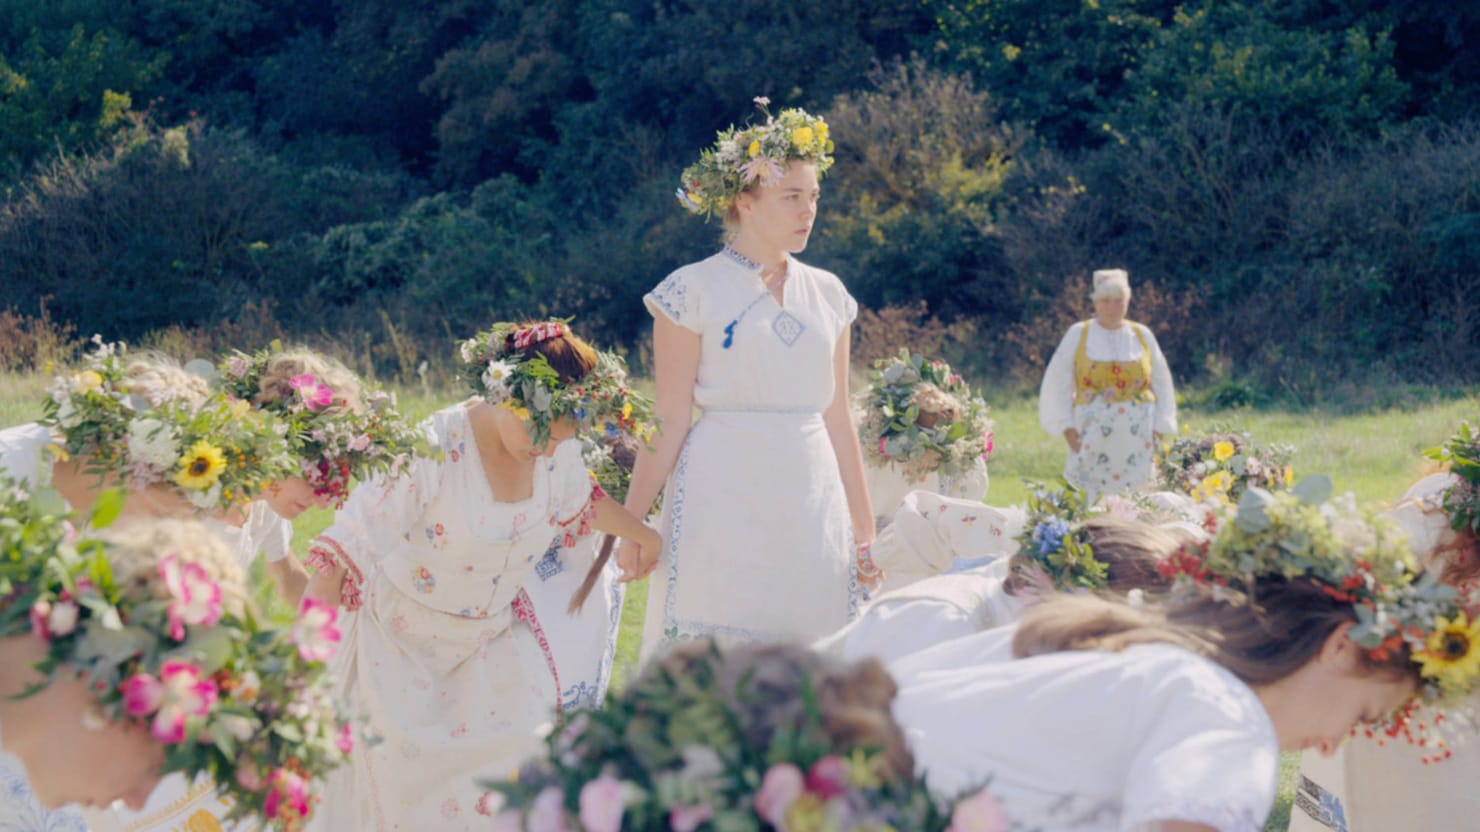 ‘Midsommar’: Is This Killer-Sex-Cult Nightmare the Scariest Movie of